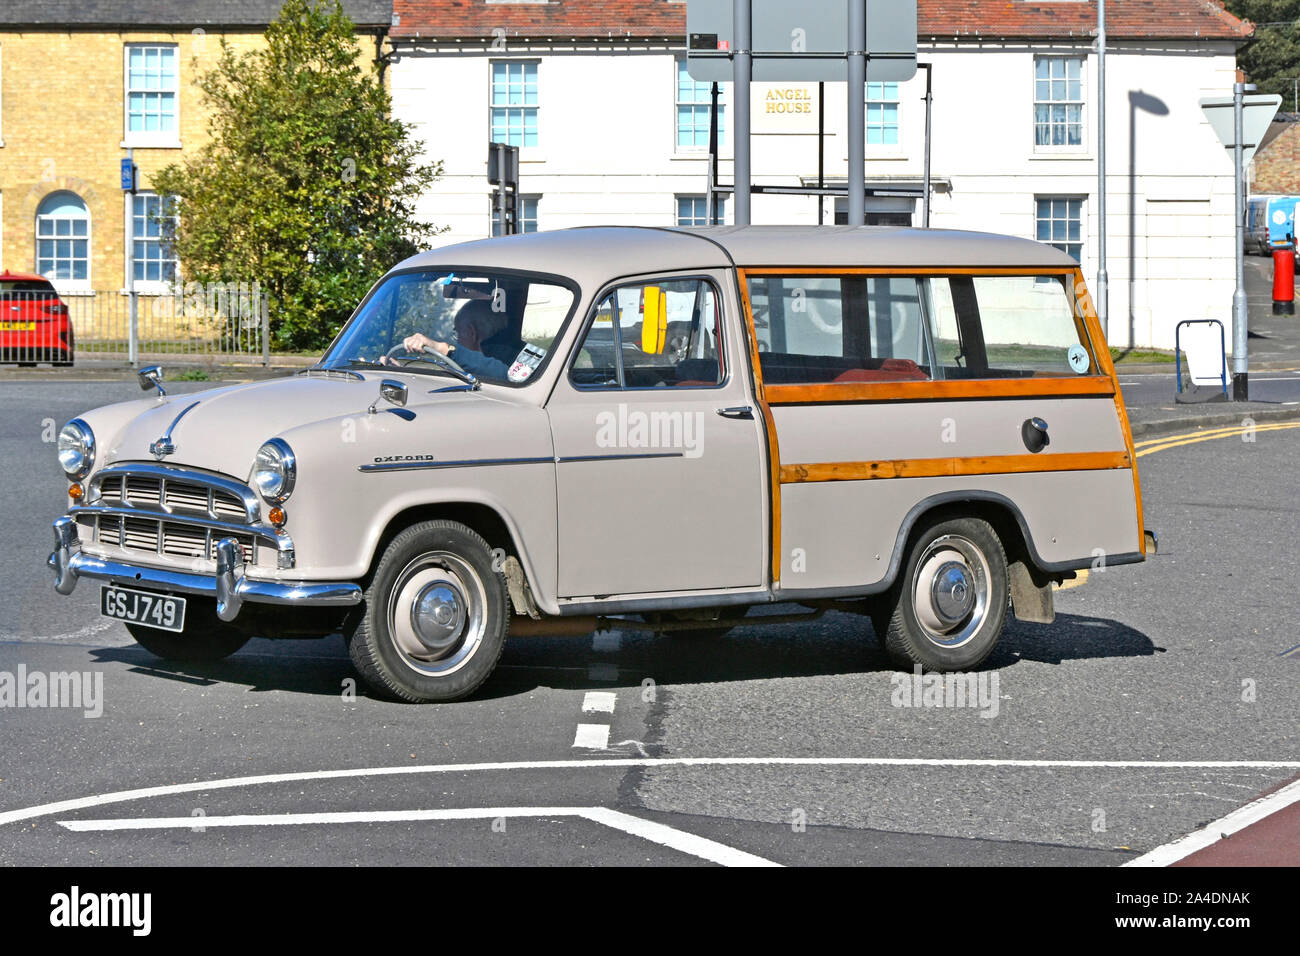 Side & front view of Morris Oxford Estate Car mass produced at Cowley Oxford in 1950s this street scene 2019 driving in Ely Cambridgeshire England UK Stock Photo